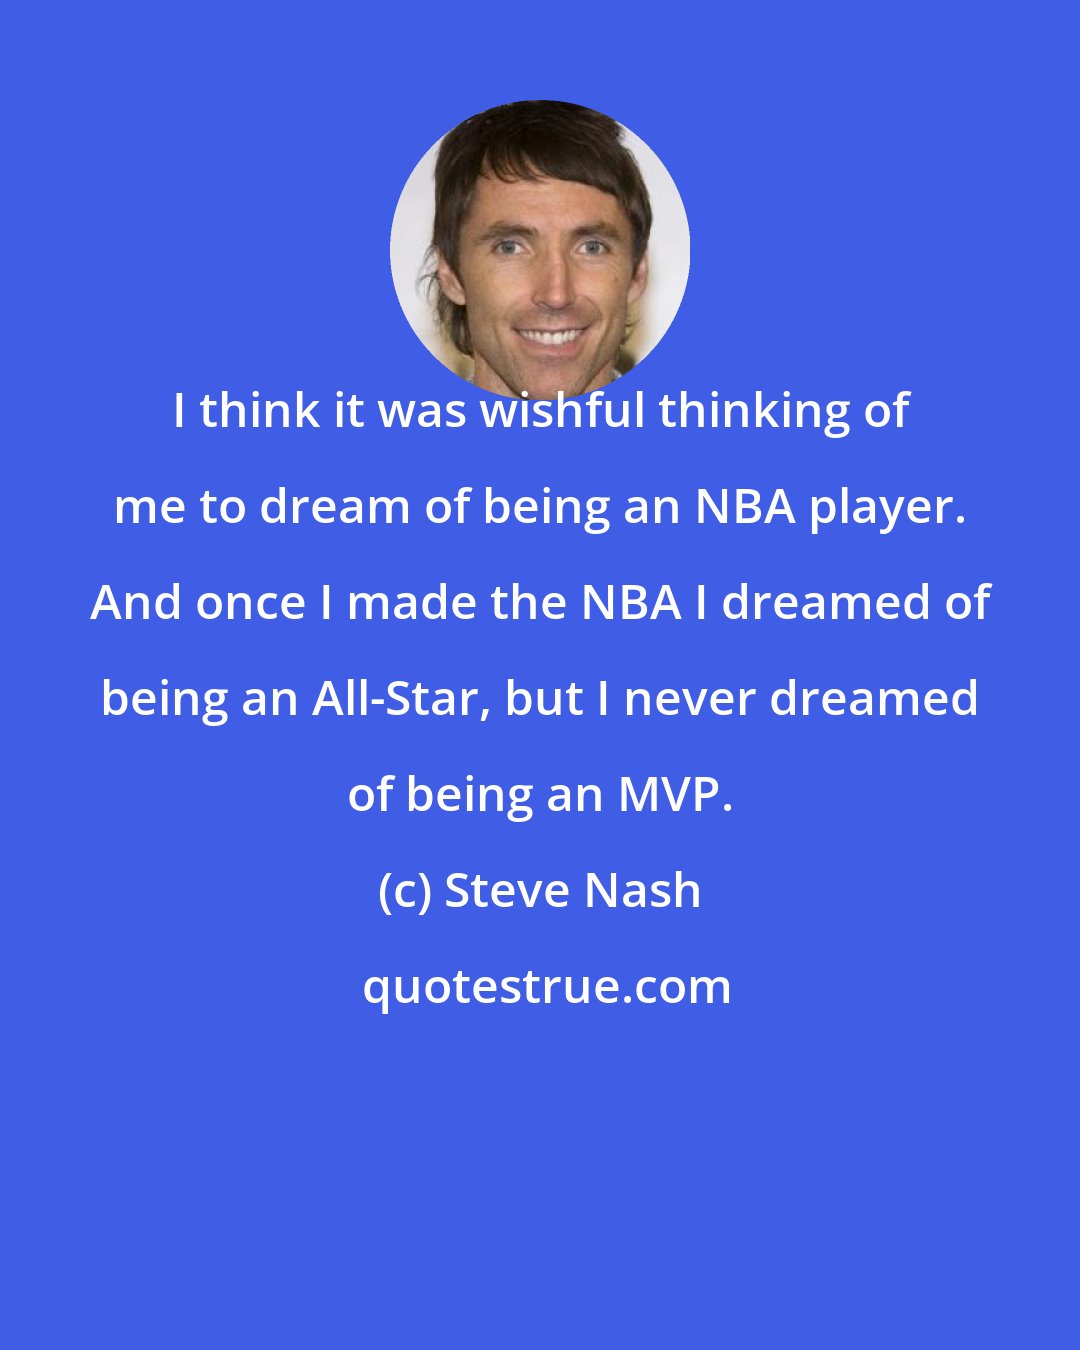 Steve Nash: I think it was wishful thinking of me to dream of being an NBA player. And once I made the NBA I dreamed of being an All-Star, but I never dreamed of being an MVP.